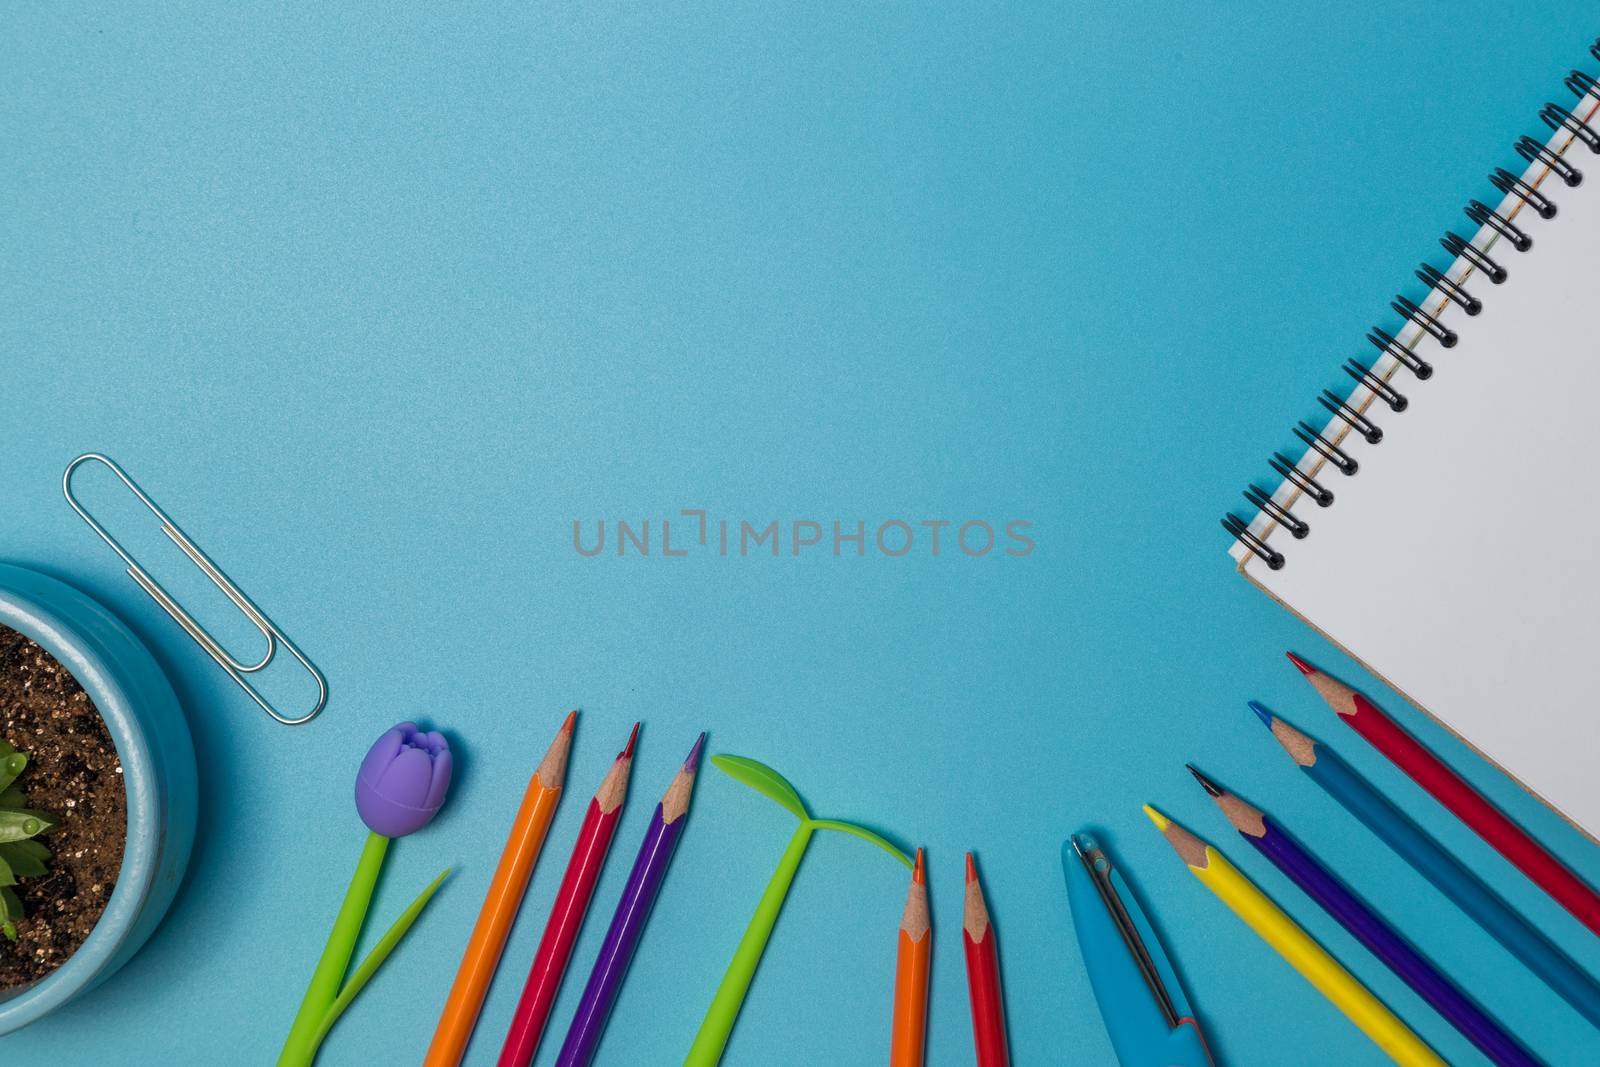 School supplies. Top view on a blue background with copy space. by galinasharapova